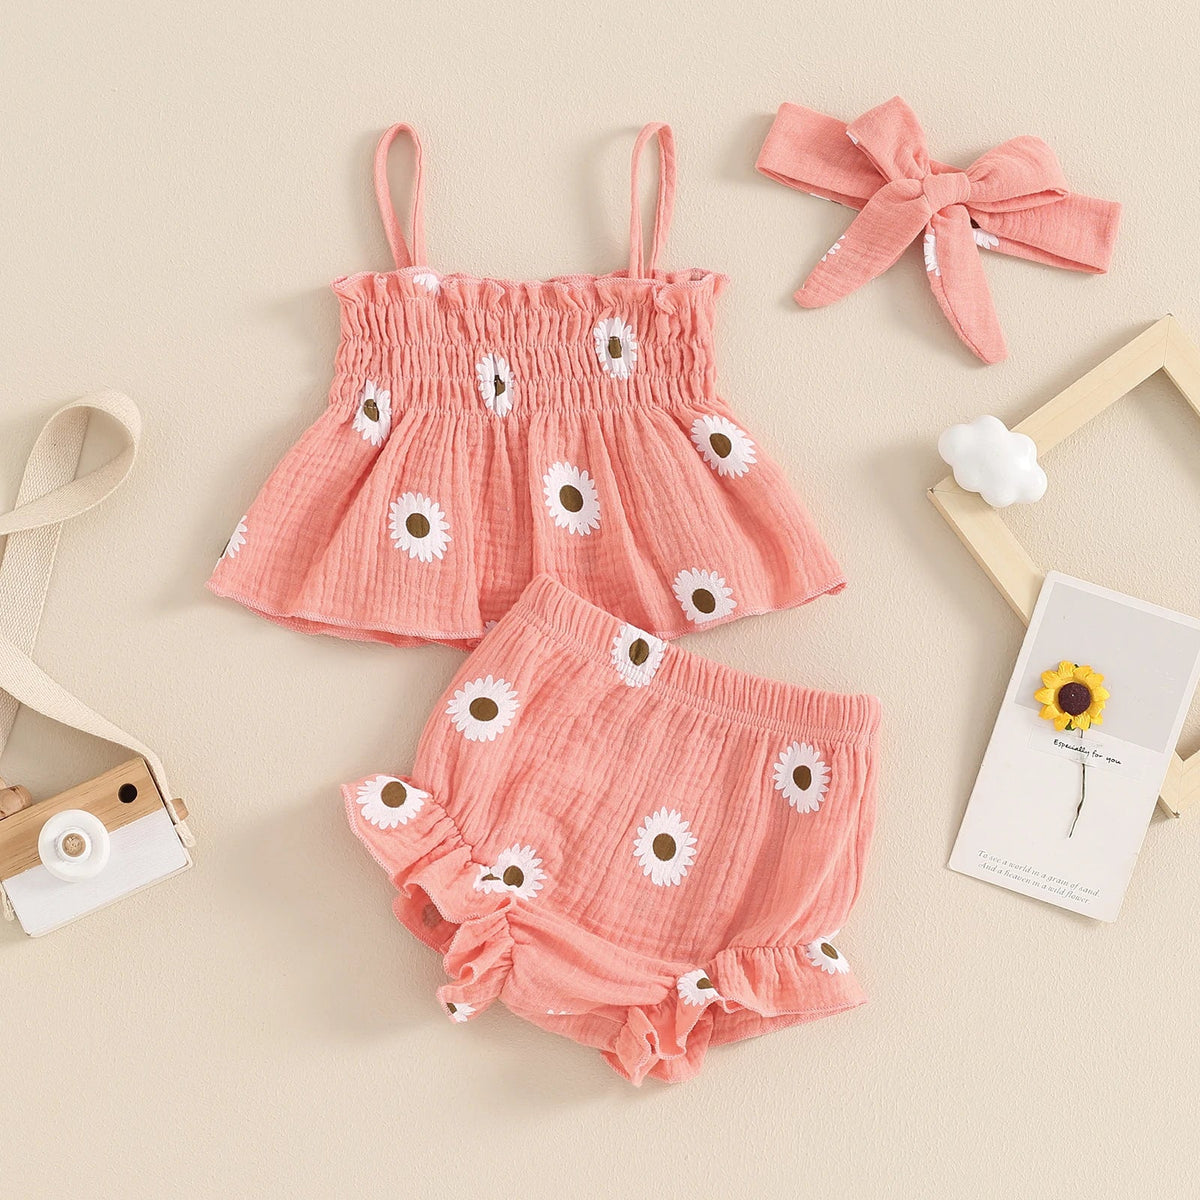 Daisy Ruffle Shorts Outfit - The Ollie Bee